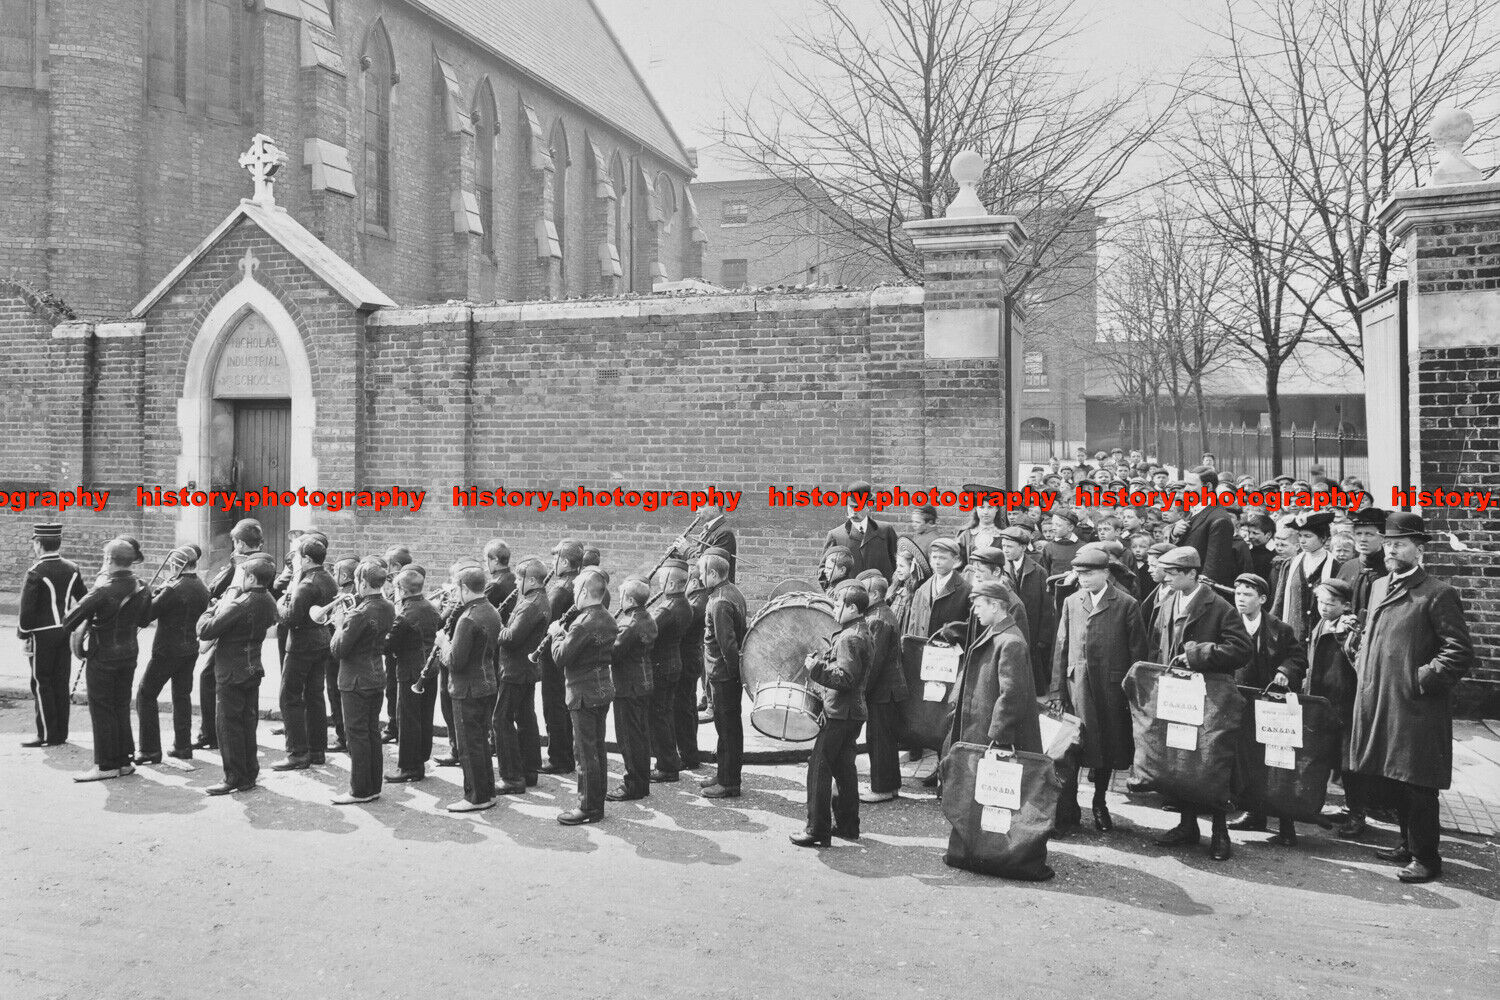 F002024 Boys emigrating to Canada setting off from Saint Nicholas Industrial Sch